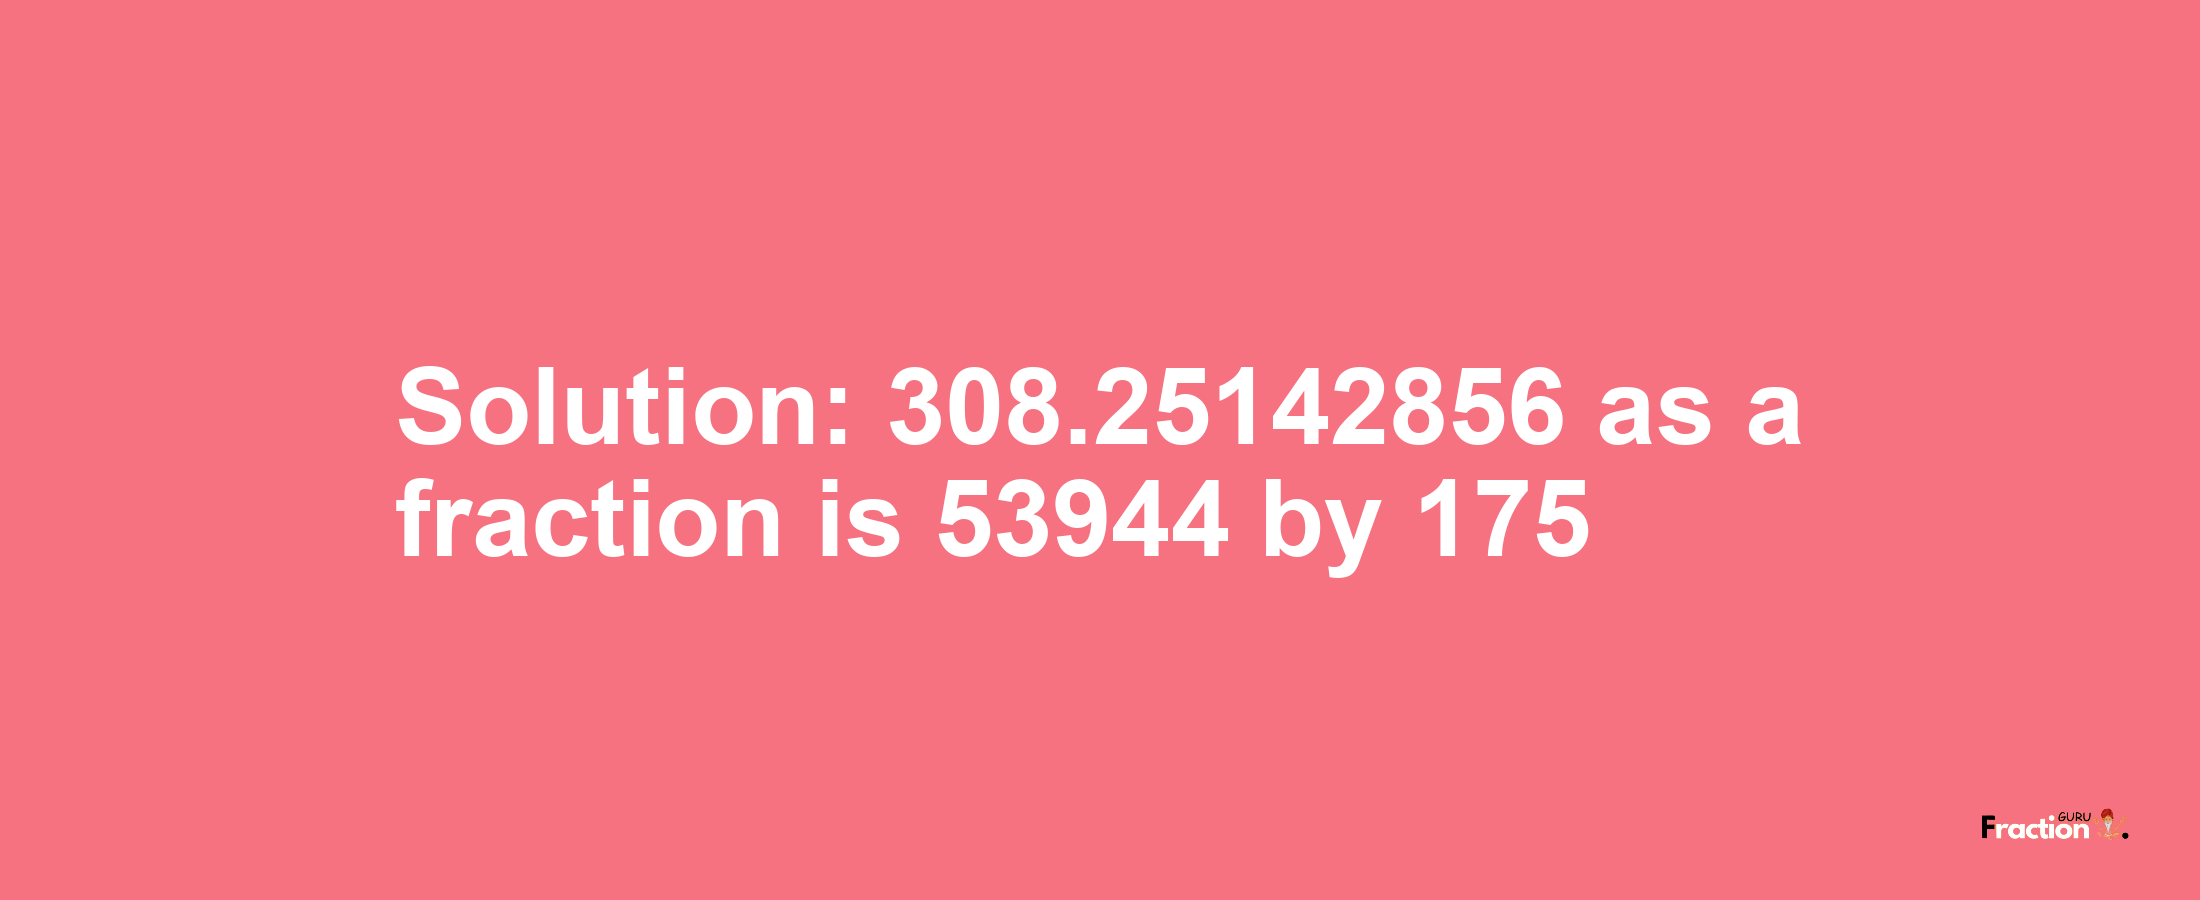 Solution:308.25142856 as a fraction is 53944/175